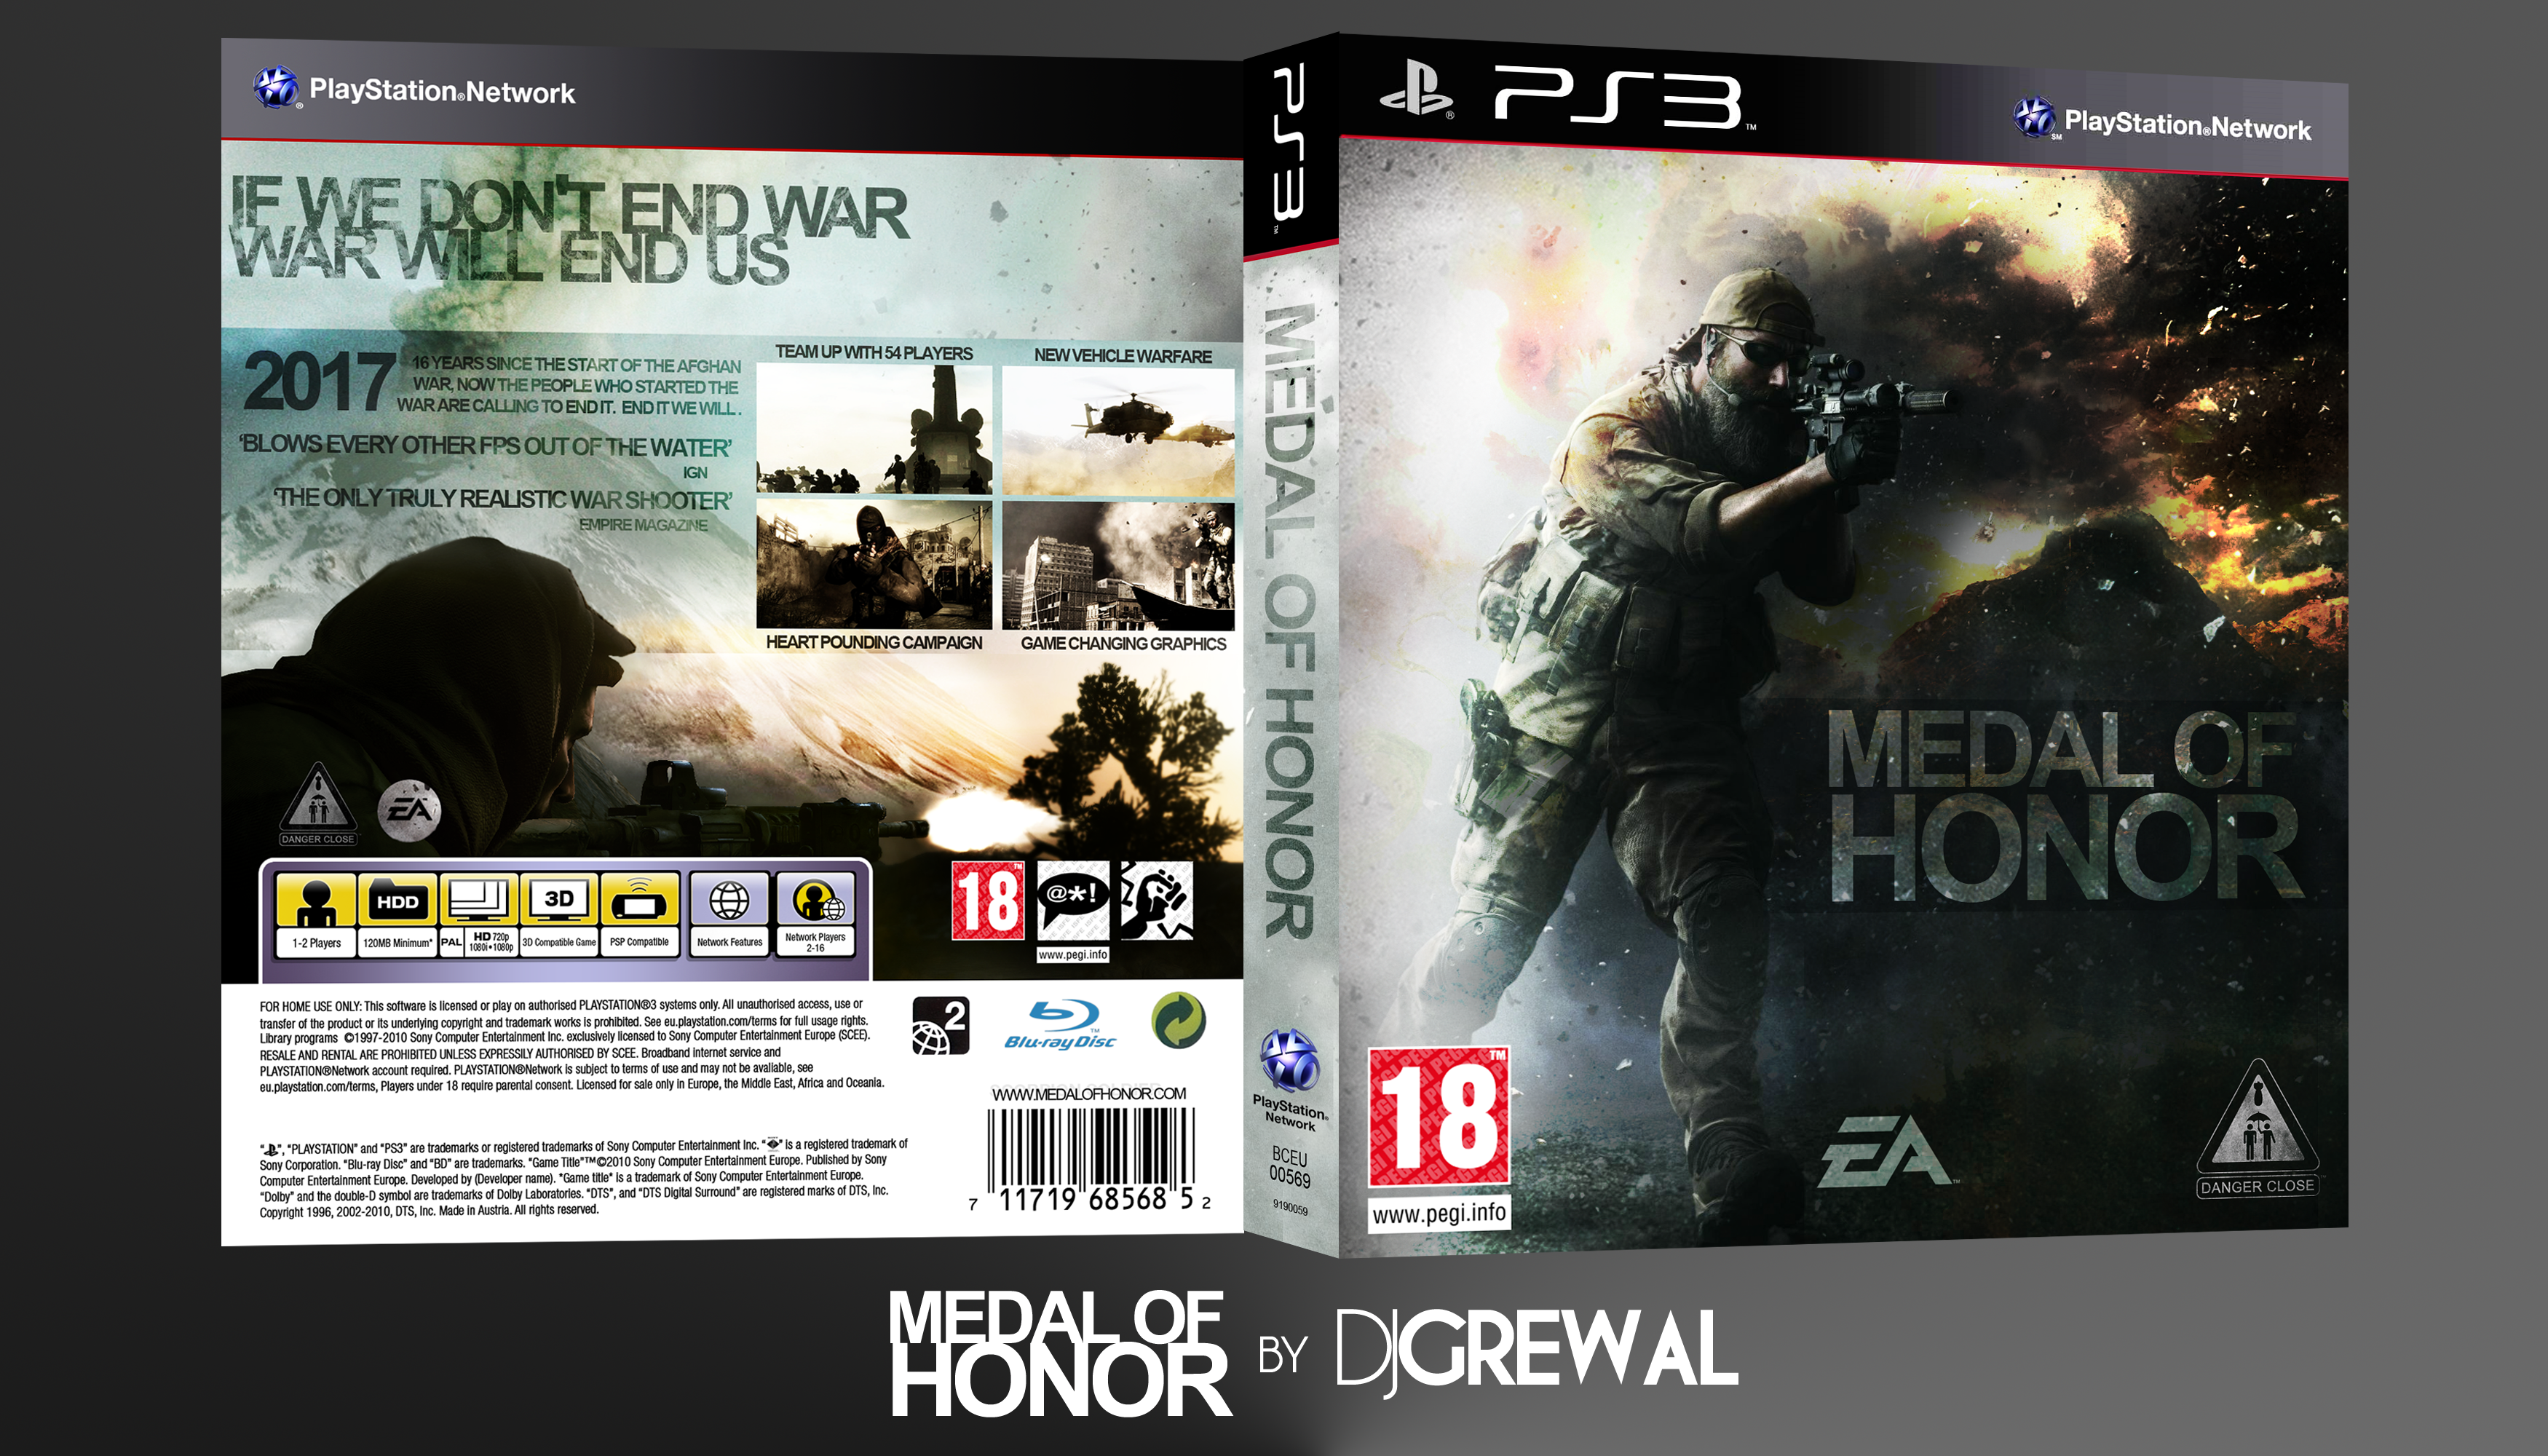 Medal of honor 3. Medal of Honor ps3 обложка. Medal of Honor 2010 ps3 обложка. Медаль оф хонор на пс3. Medal of Honor Warfighter ps3.